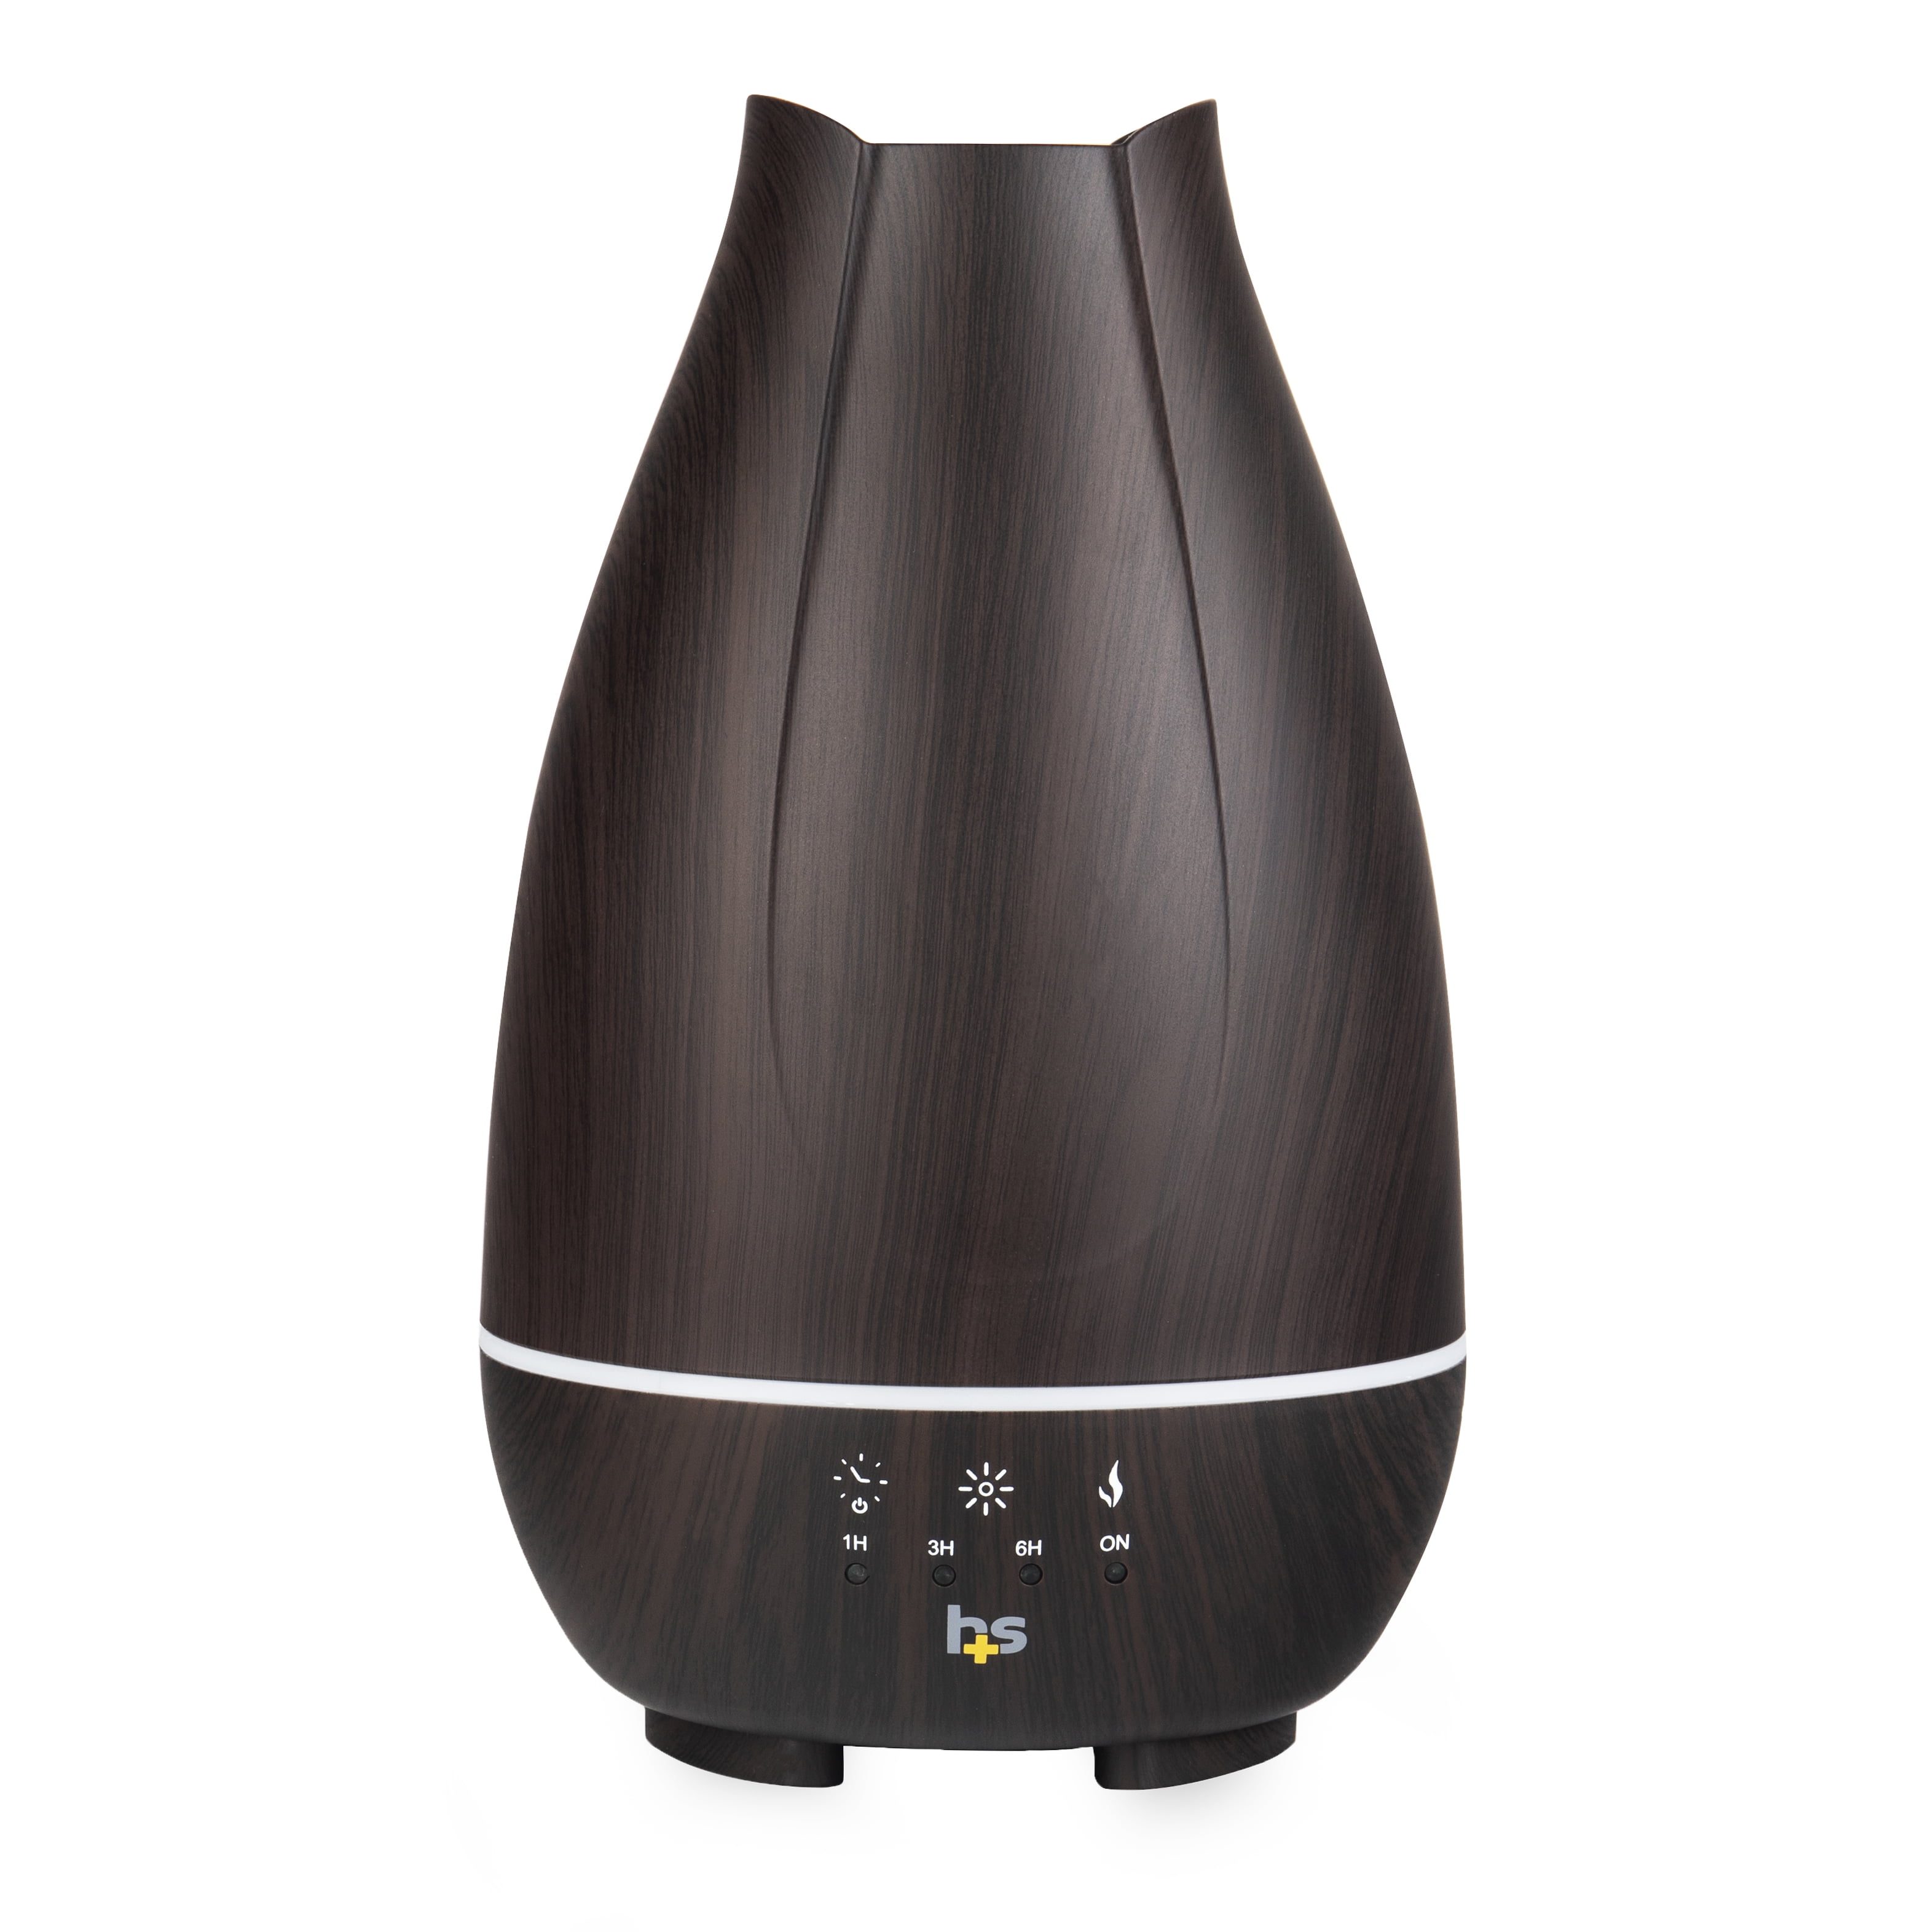 Essential Oil Diffuser, Upgraded 550ml Diffusers for Essential Oils, Ultra-Quiet Aromatherapy Diffuser, Ultrasonic Cool Mist Humidifier with 7 Light